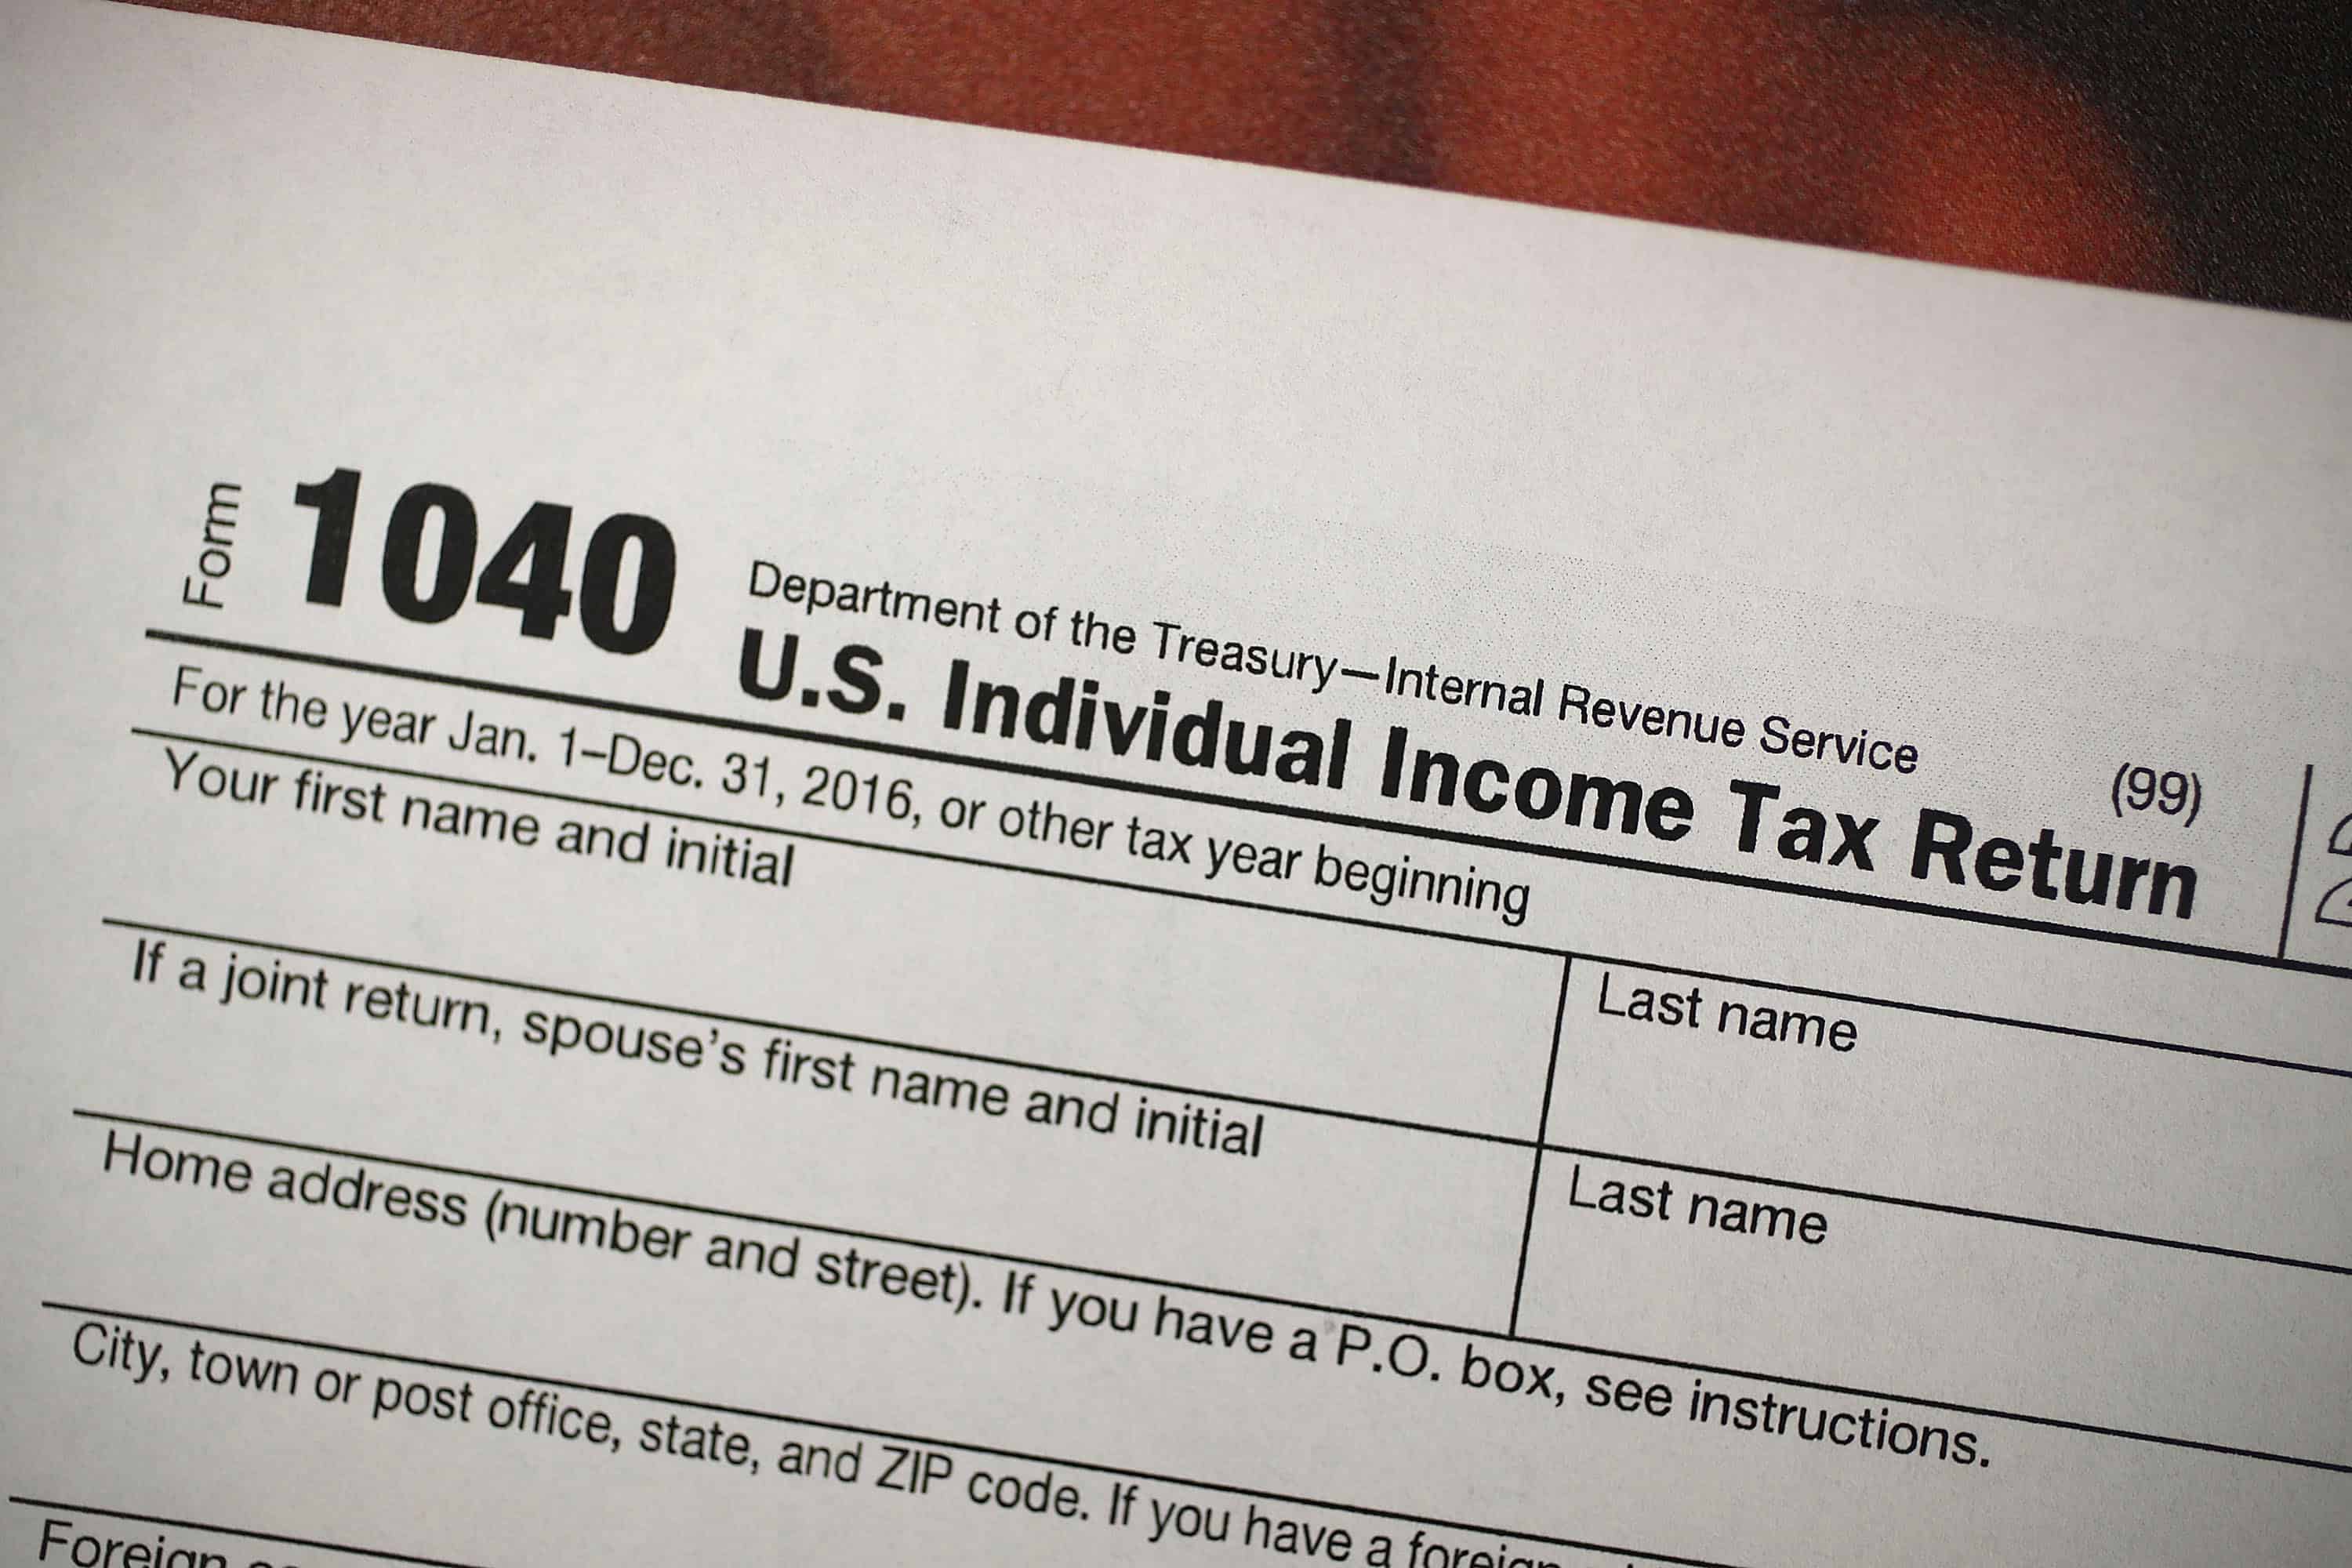 Irs Extends Tax Filing Deadline To May 17th To Give Taxpayers